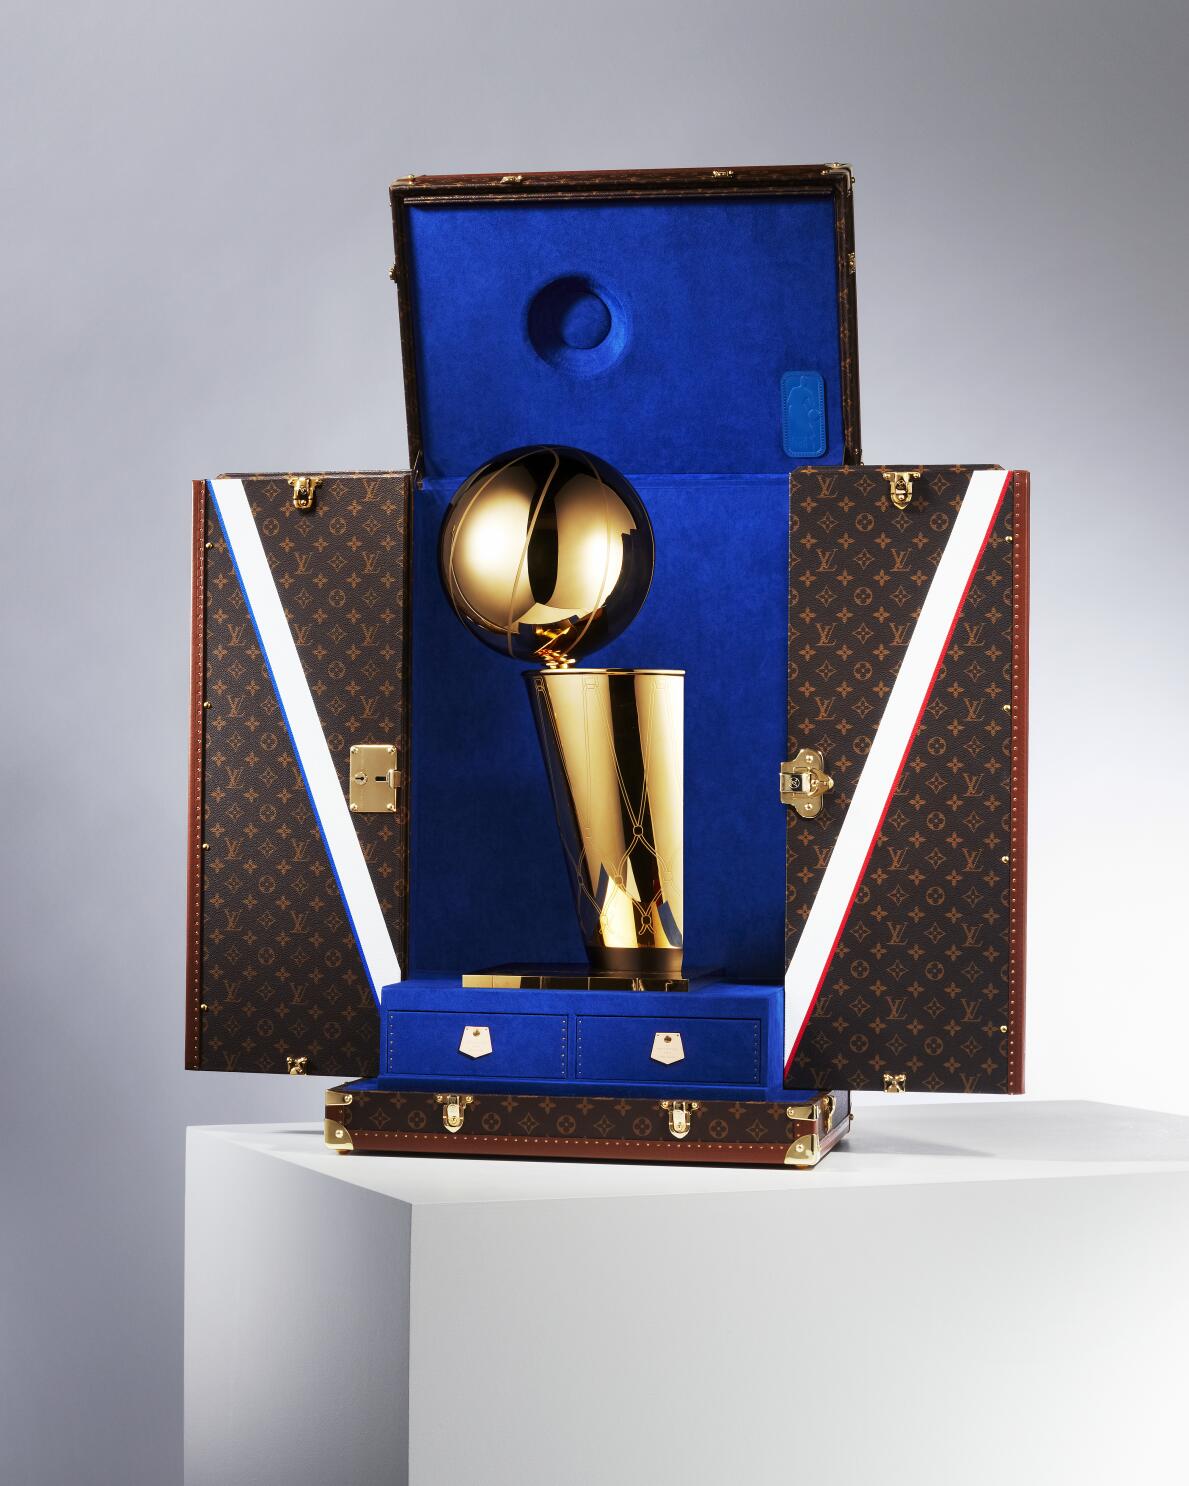 Here's a Closer Look at Louis Vuitton's NBA Capsule Collection